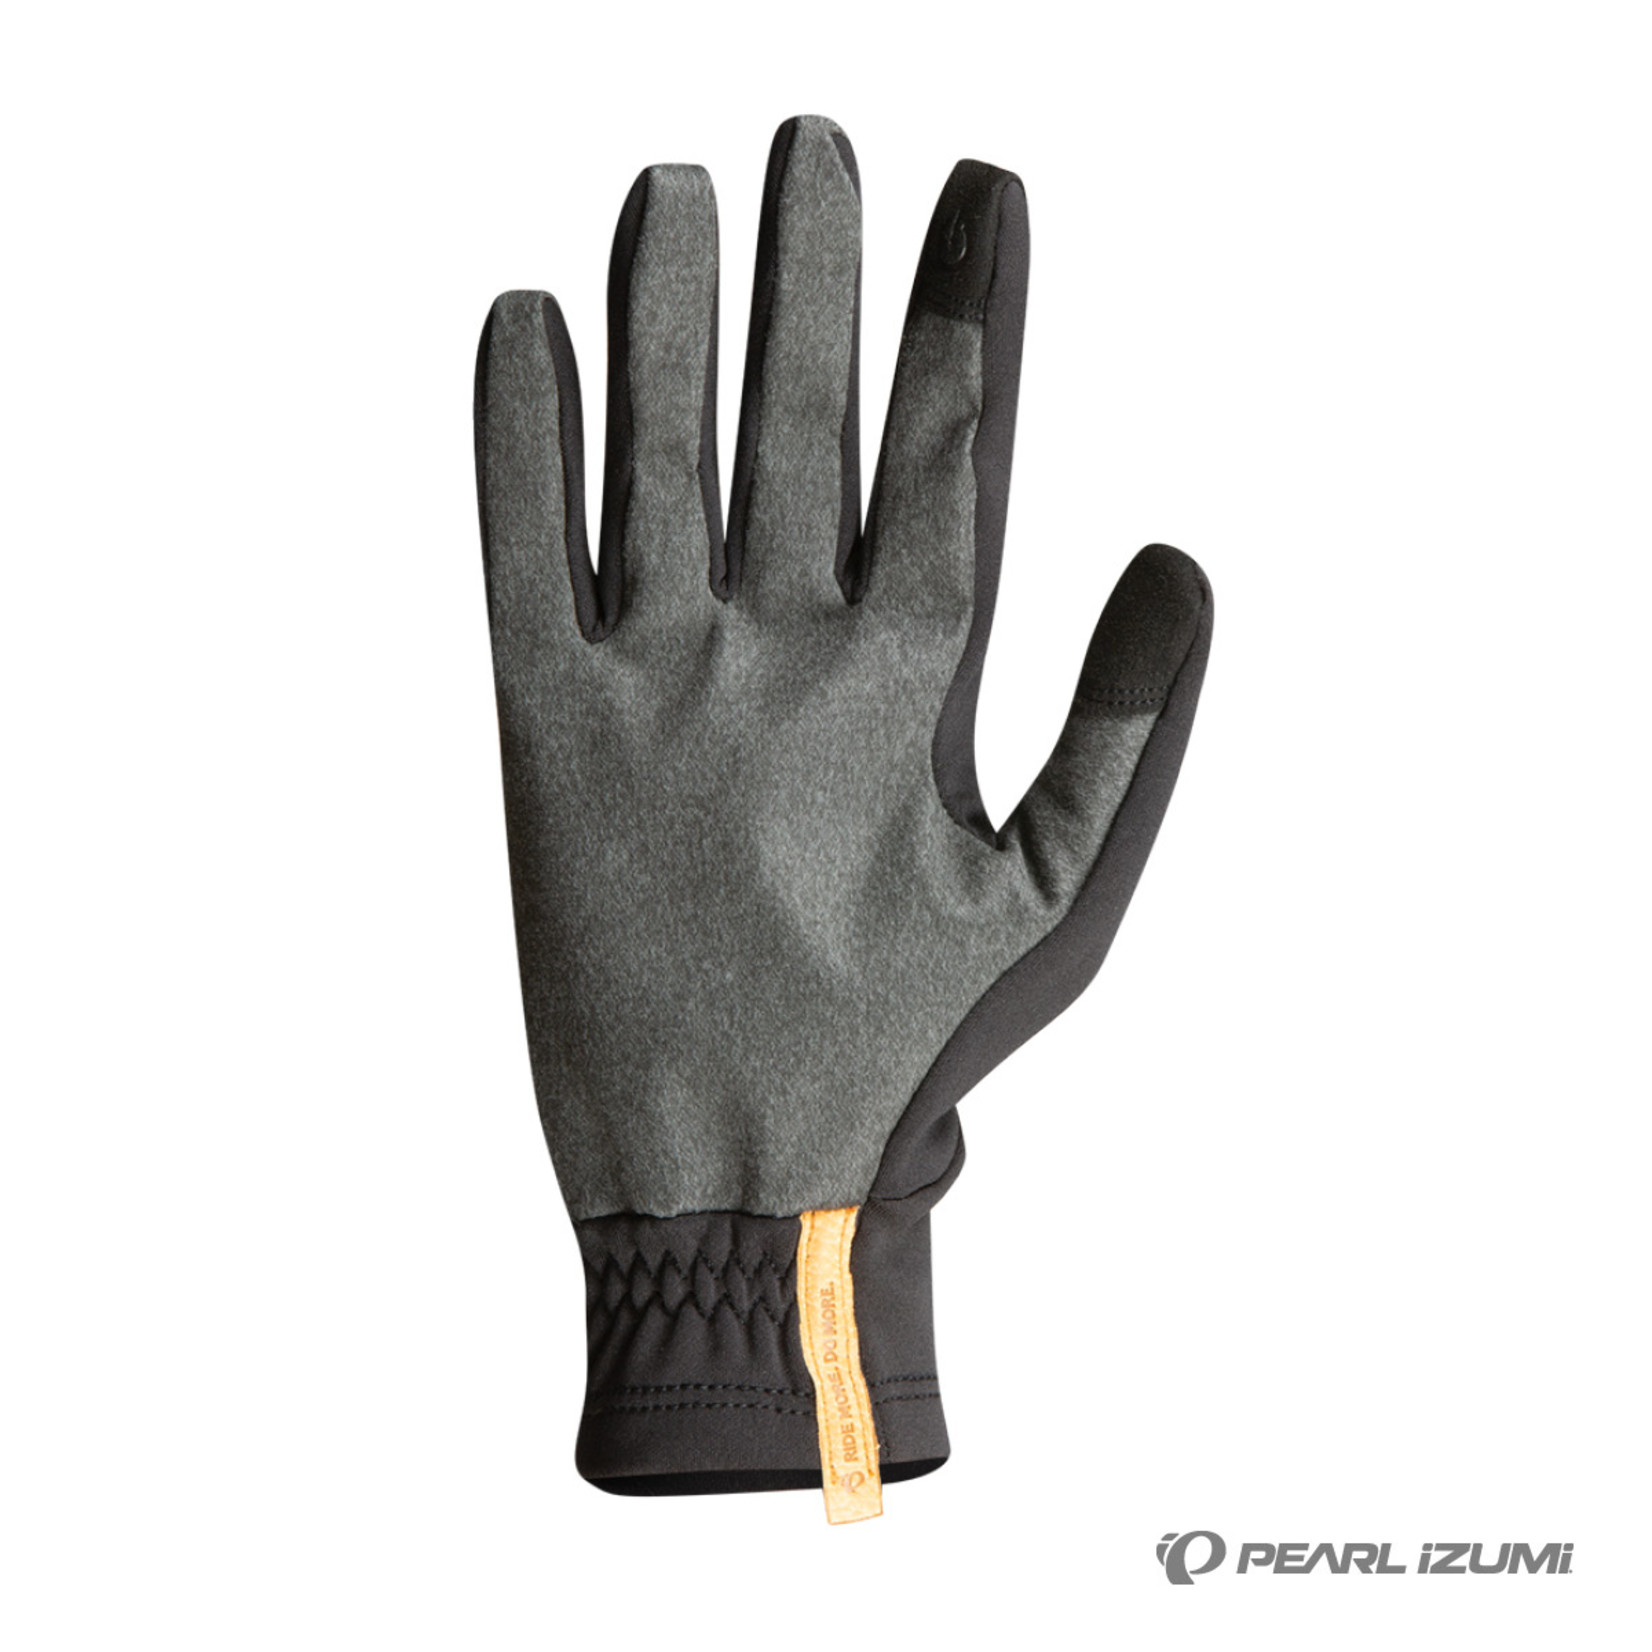 Pearl Izumi Pearl Izumi Thermal Gloves - Full finger Synthetic Leather